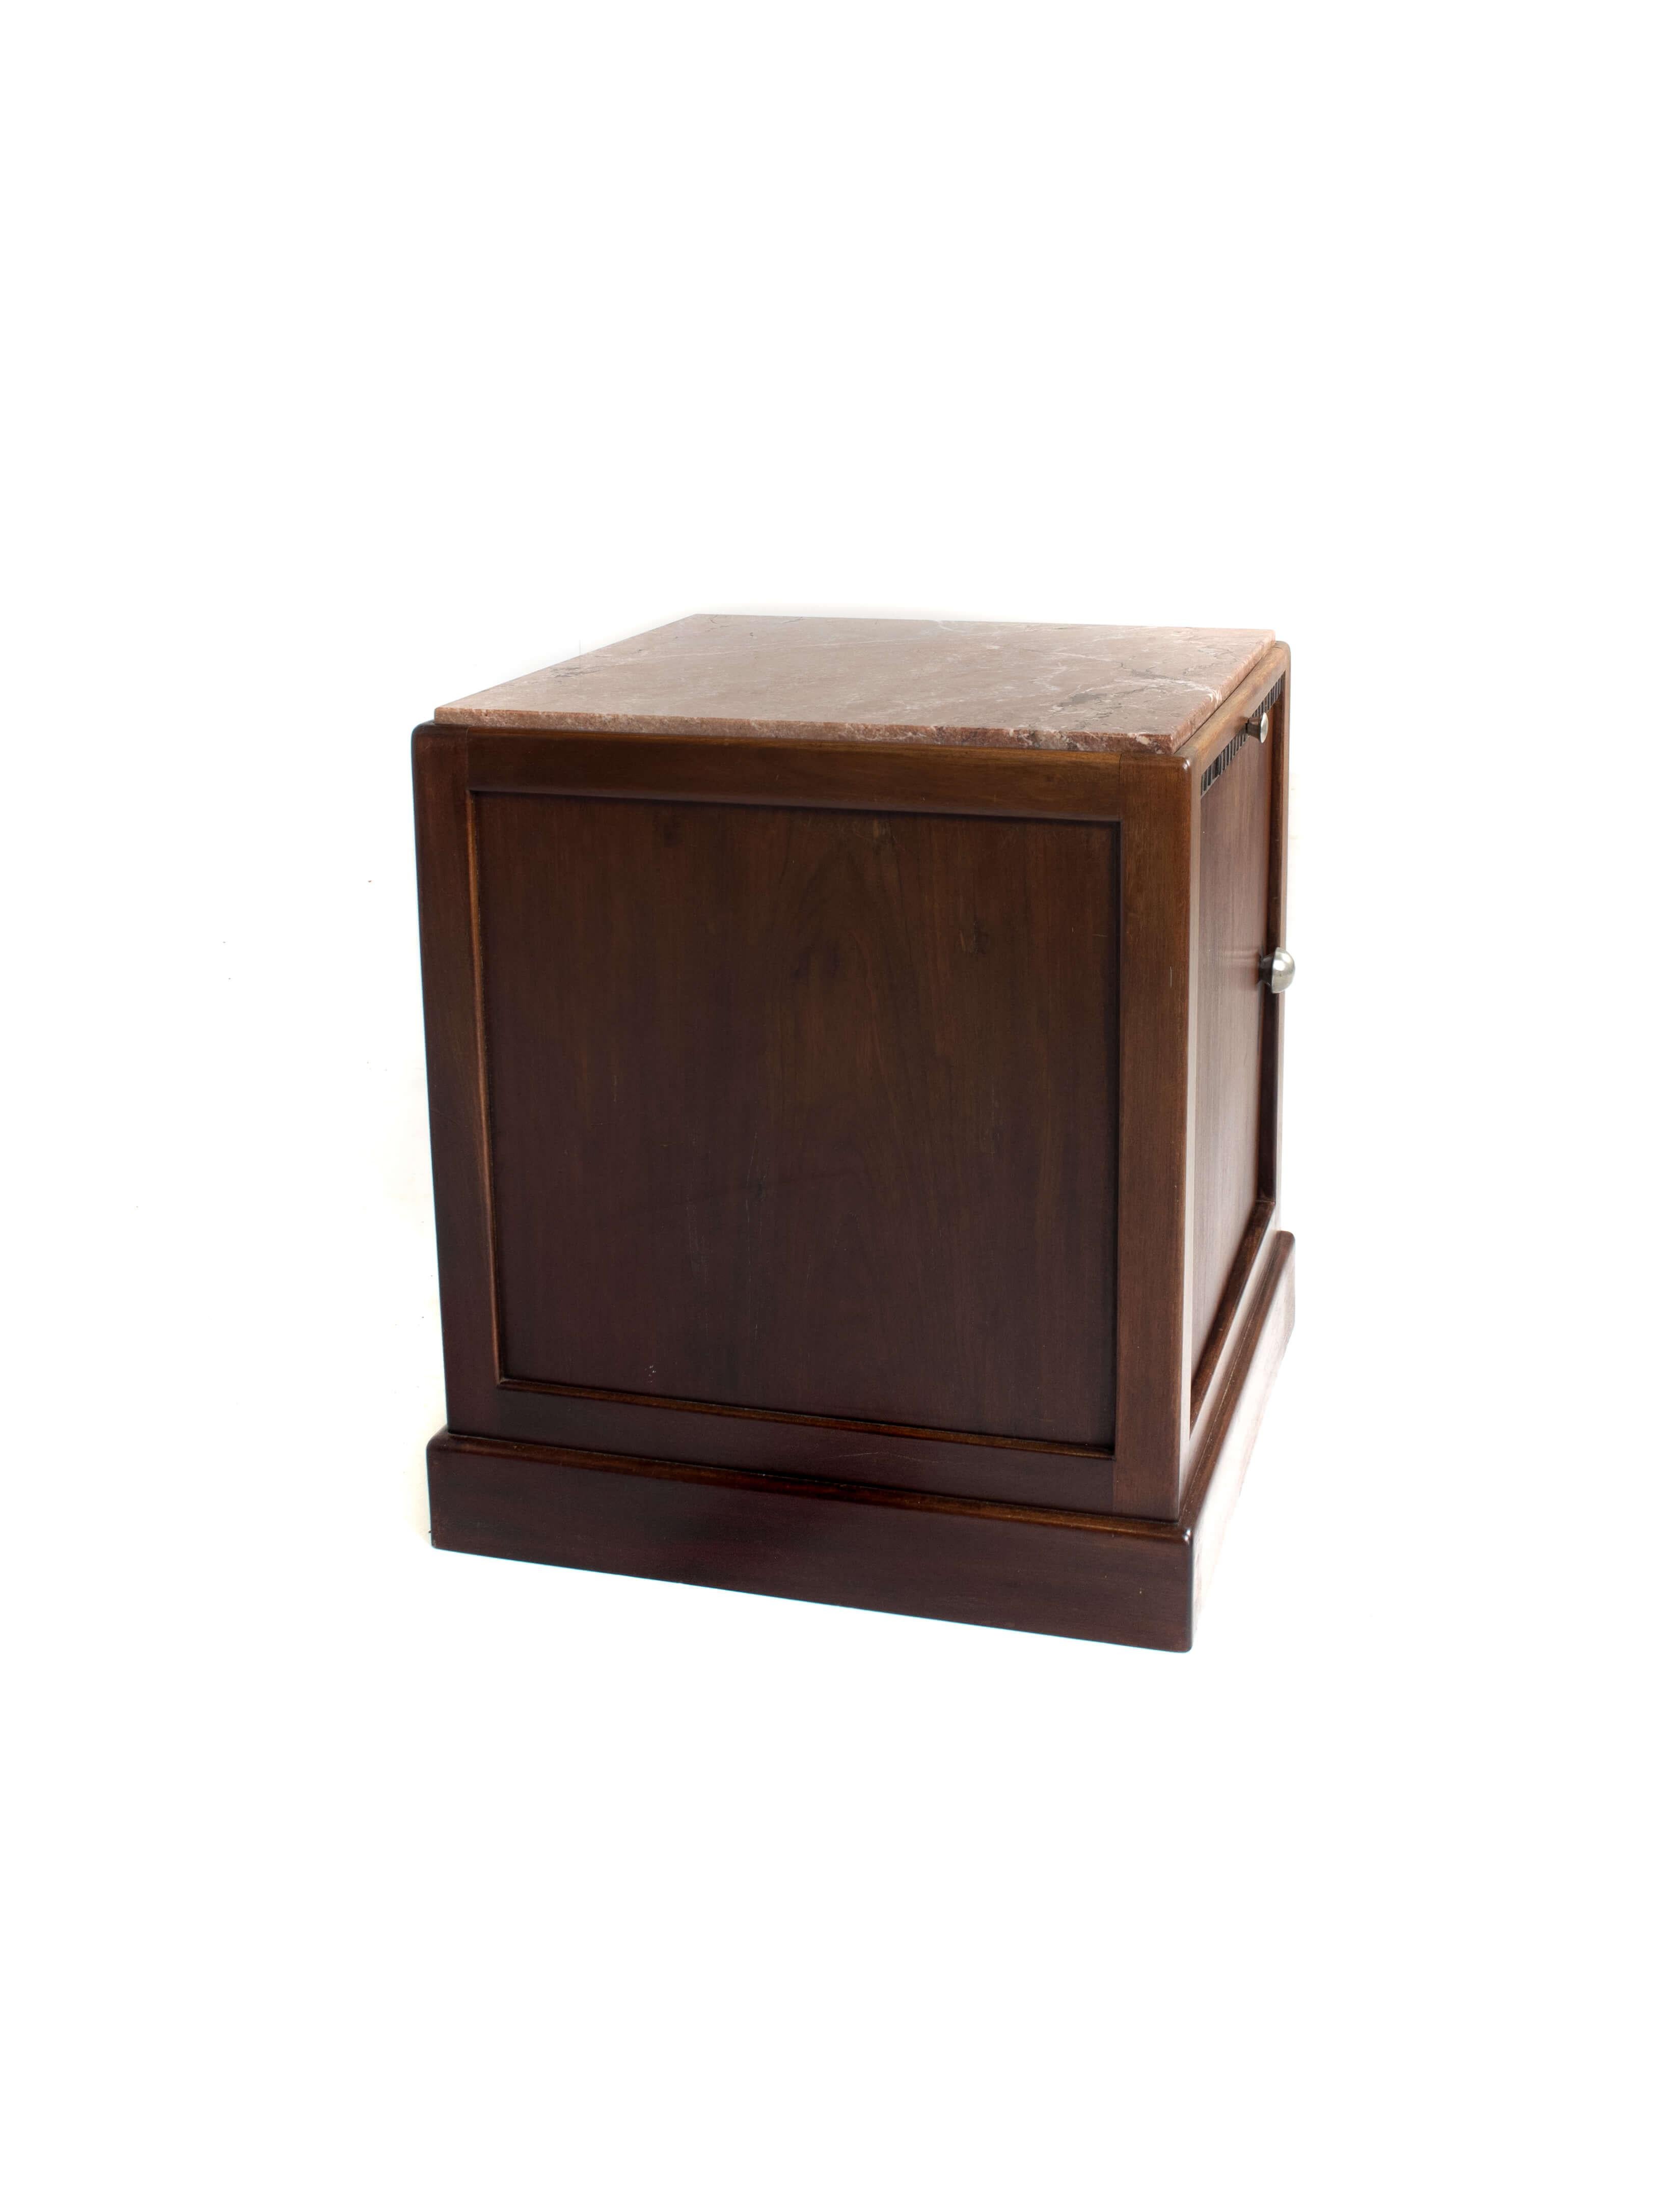 Mid-20th Century Art Deco Night Stand with Marble Top, Netherlands, ±1930s